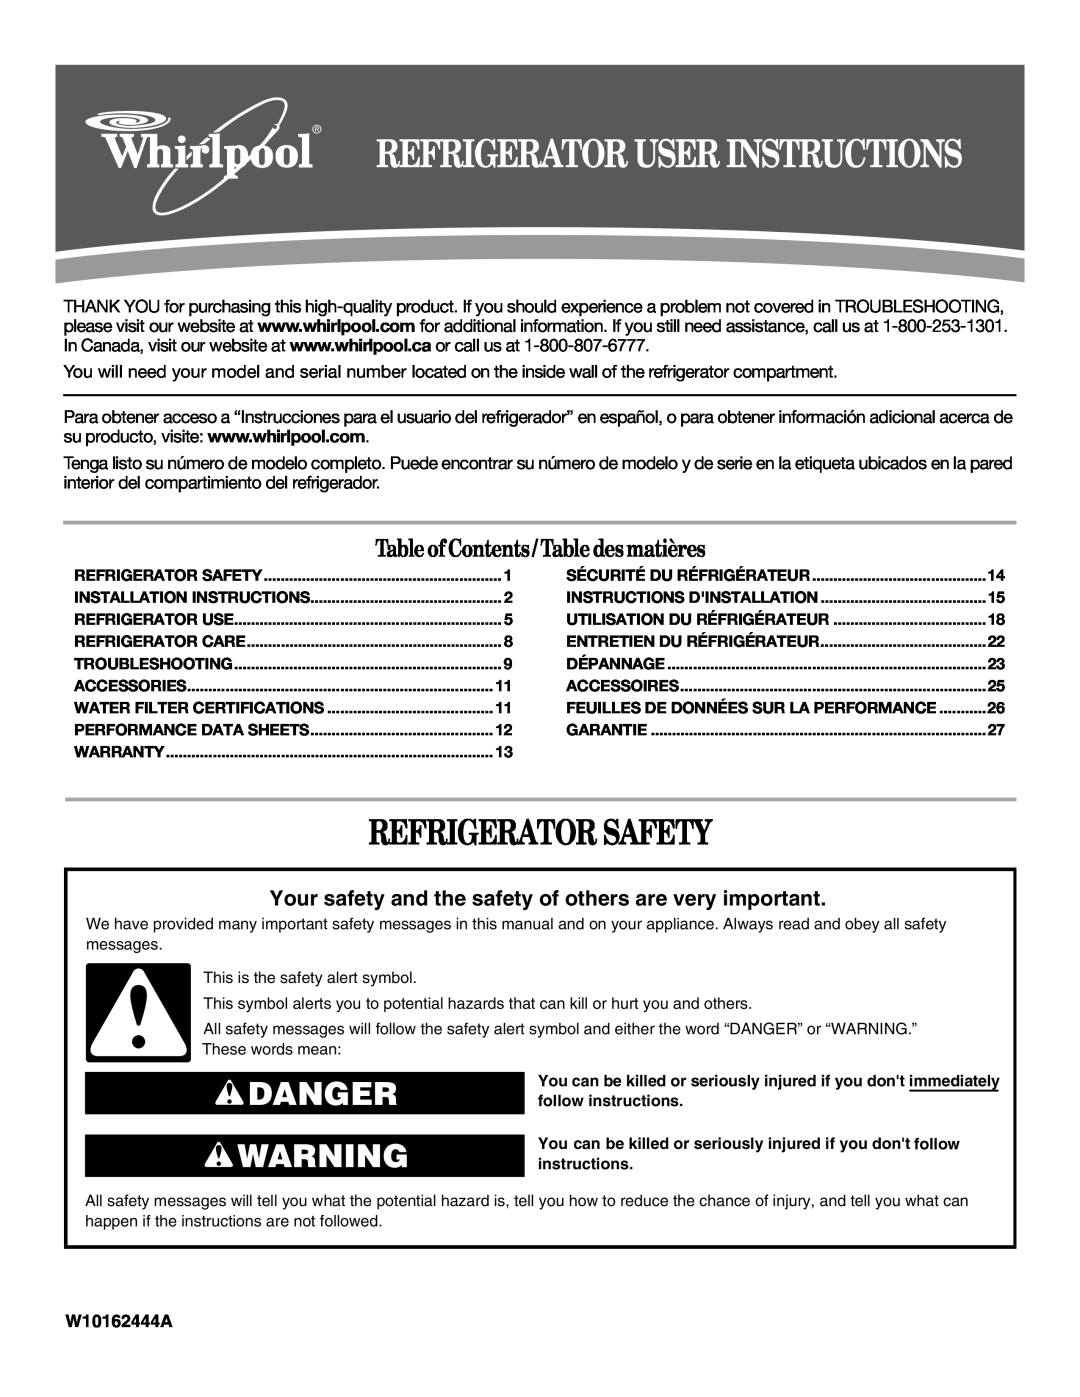 Whirlpool ED5FHAXV installation instructions Refrigerator Safety, Danger, Table of Contents / Table desmatières 